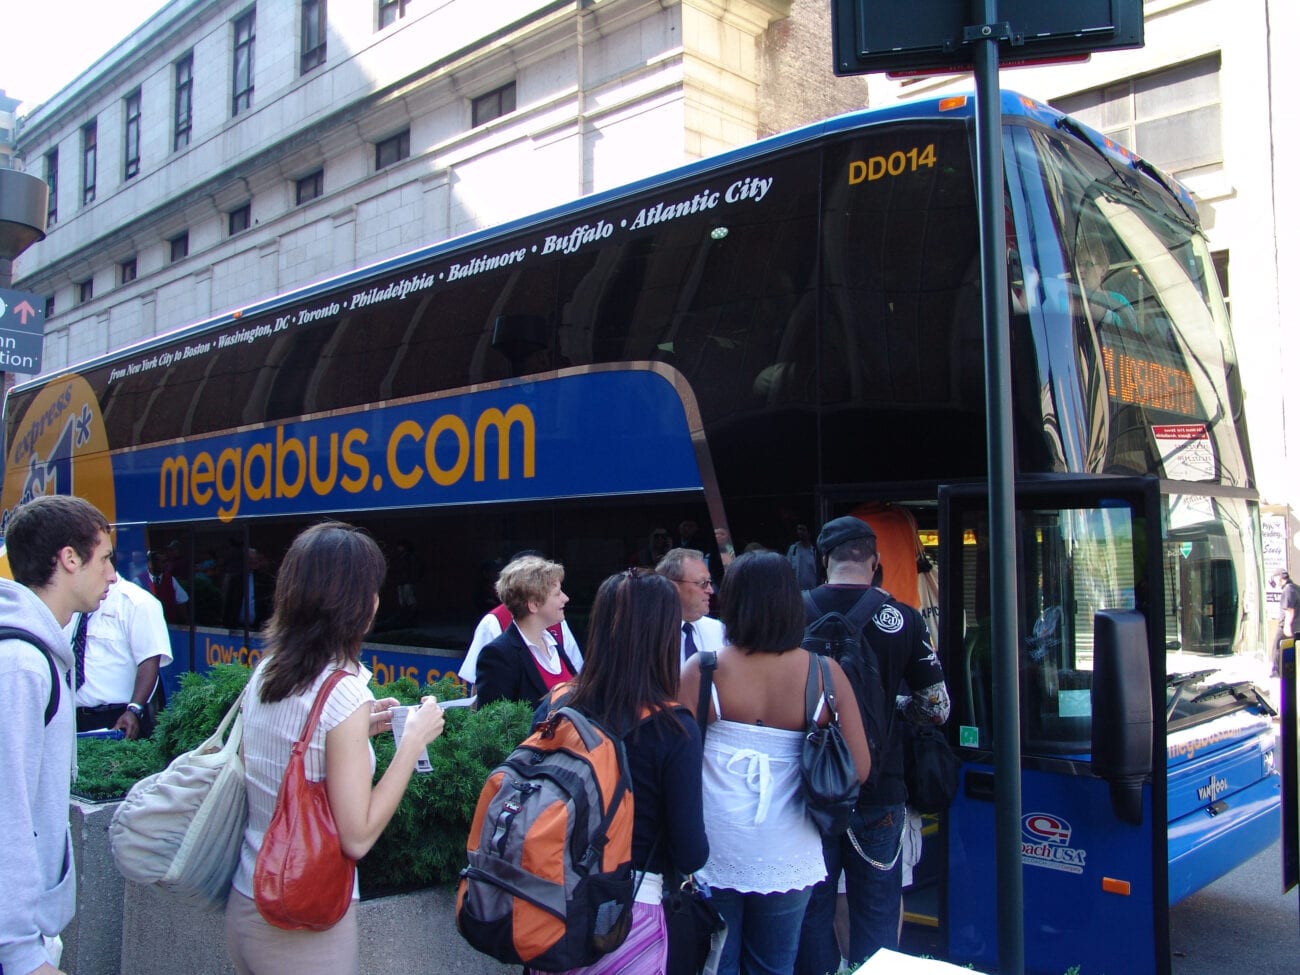 Hoping to take Megabus to Washington D.C.? Megabus canceled all their tickets to and from the nation's capital. Read about the move here.